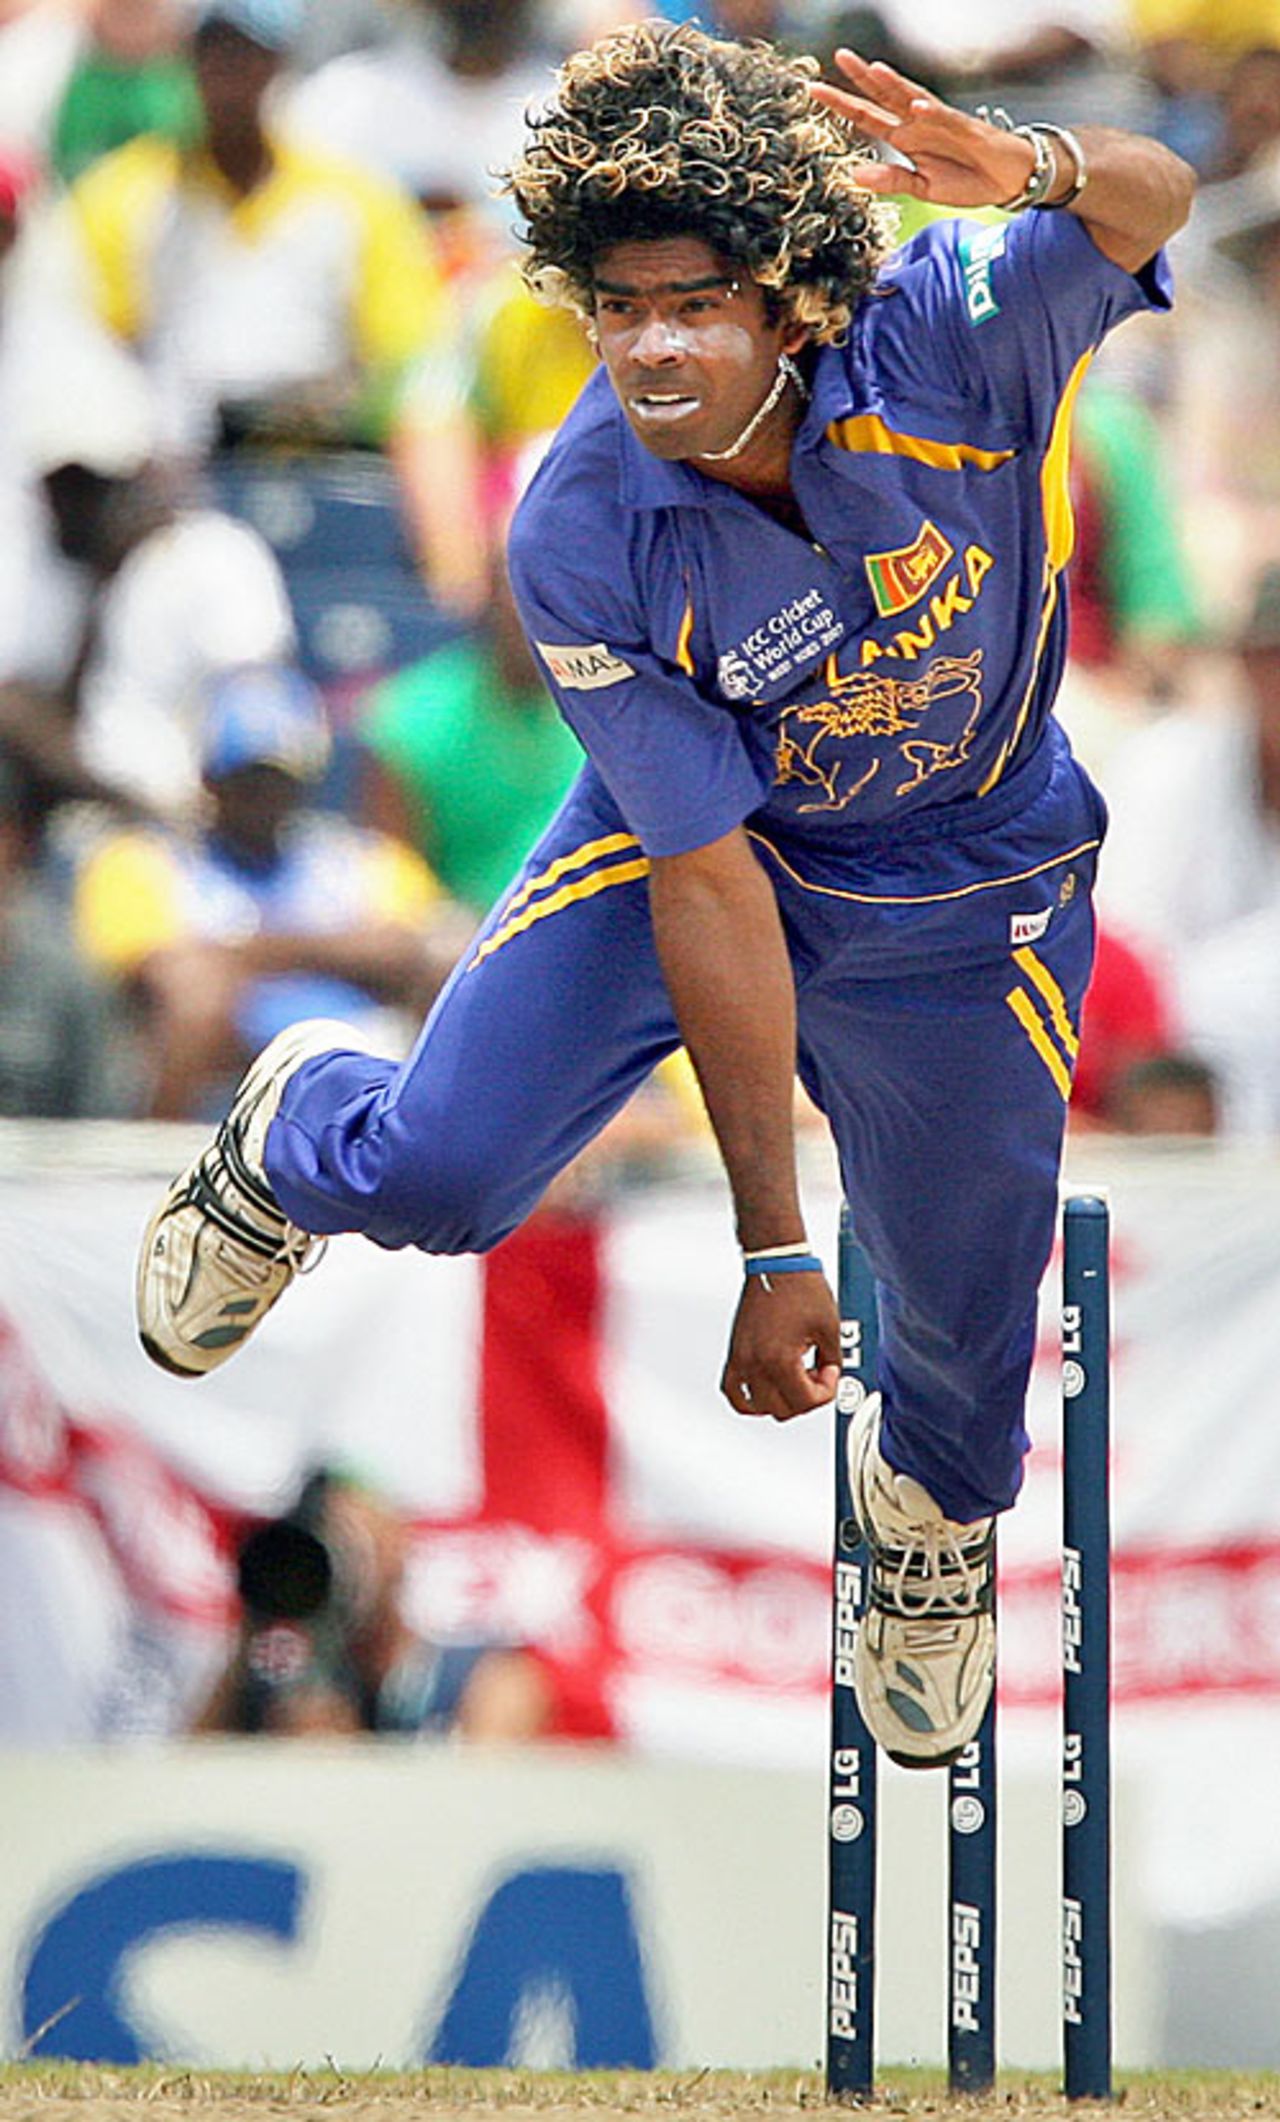 Lasith Malinga lets fly another delivery during the final, Australia v Sri Lanka, World Cup final, Barbados, April 28, 2007